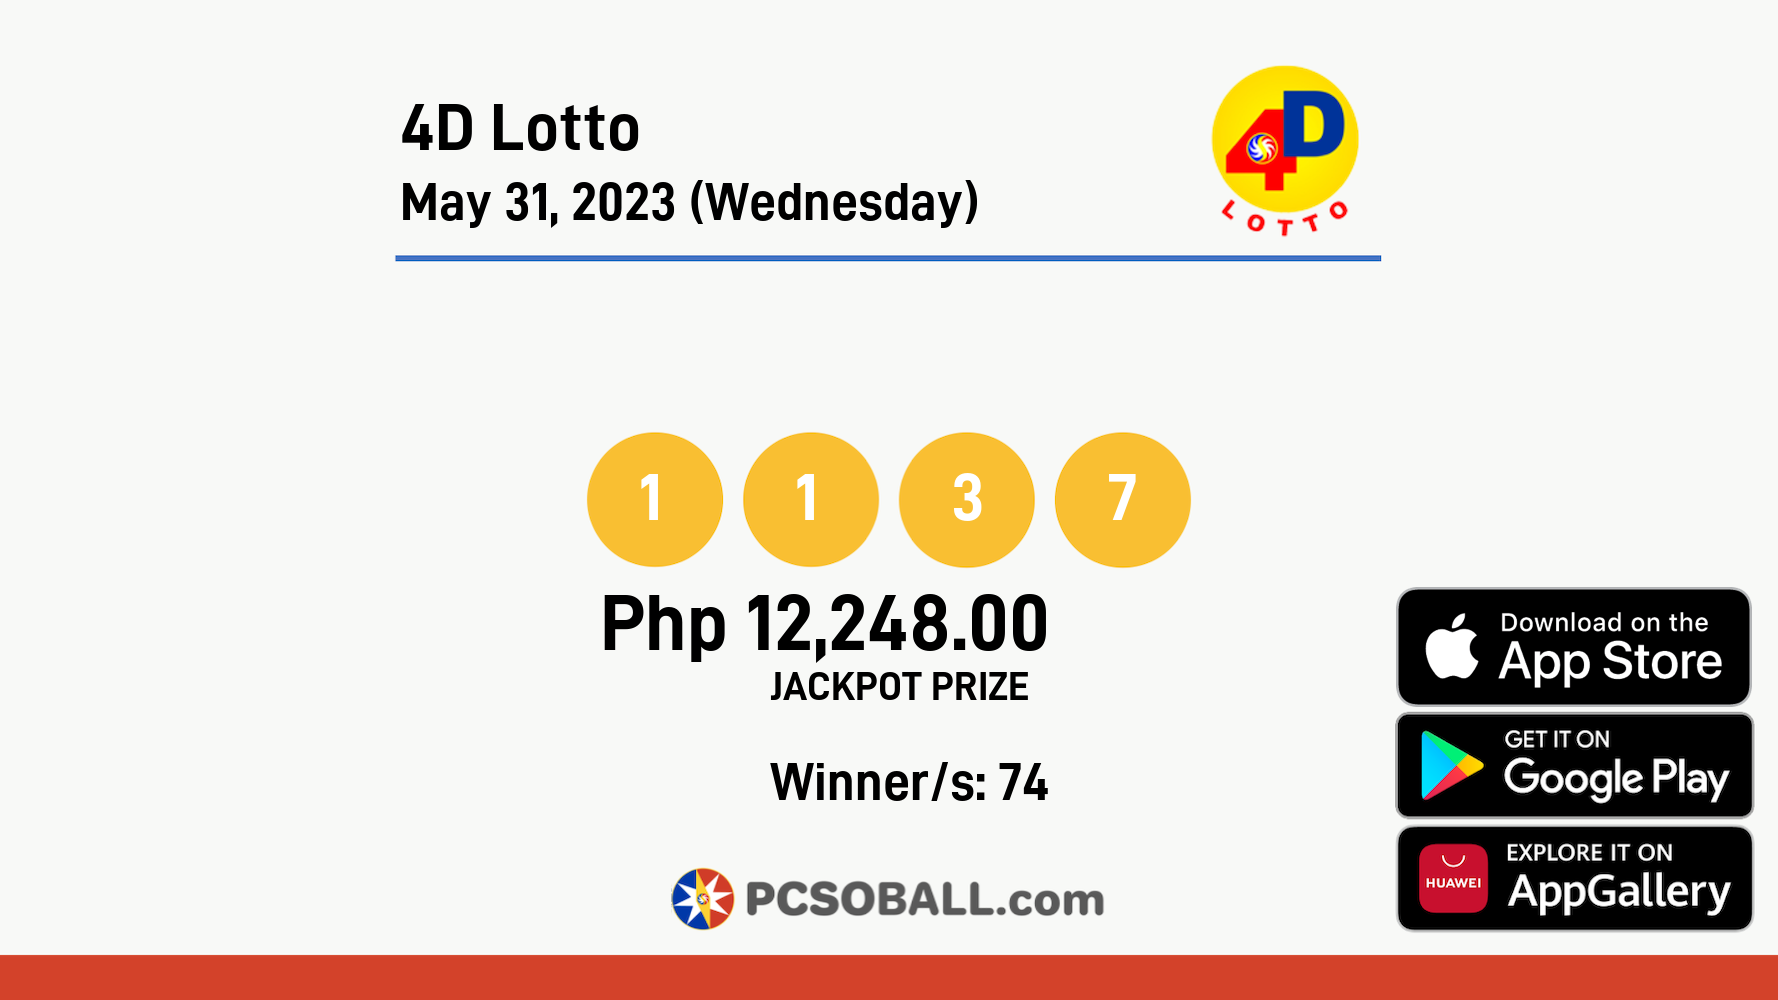 4D Lotto May 31, 2023 (Wednesday) Result